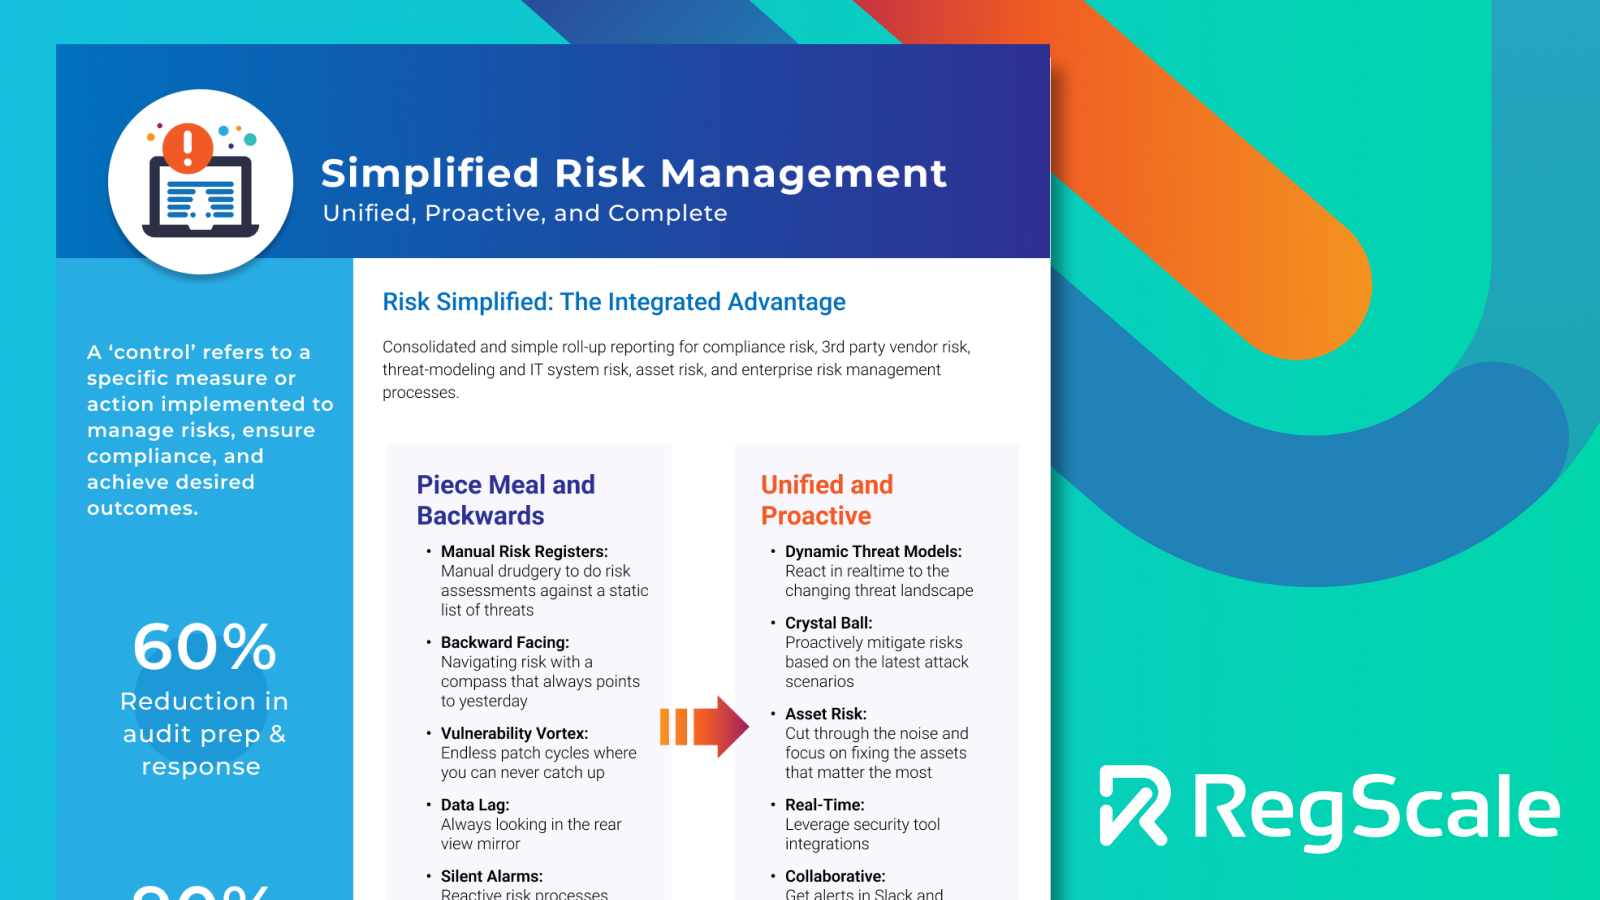 Simplified Risk Management Unified Proactive and Complete